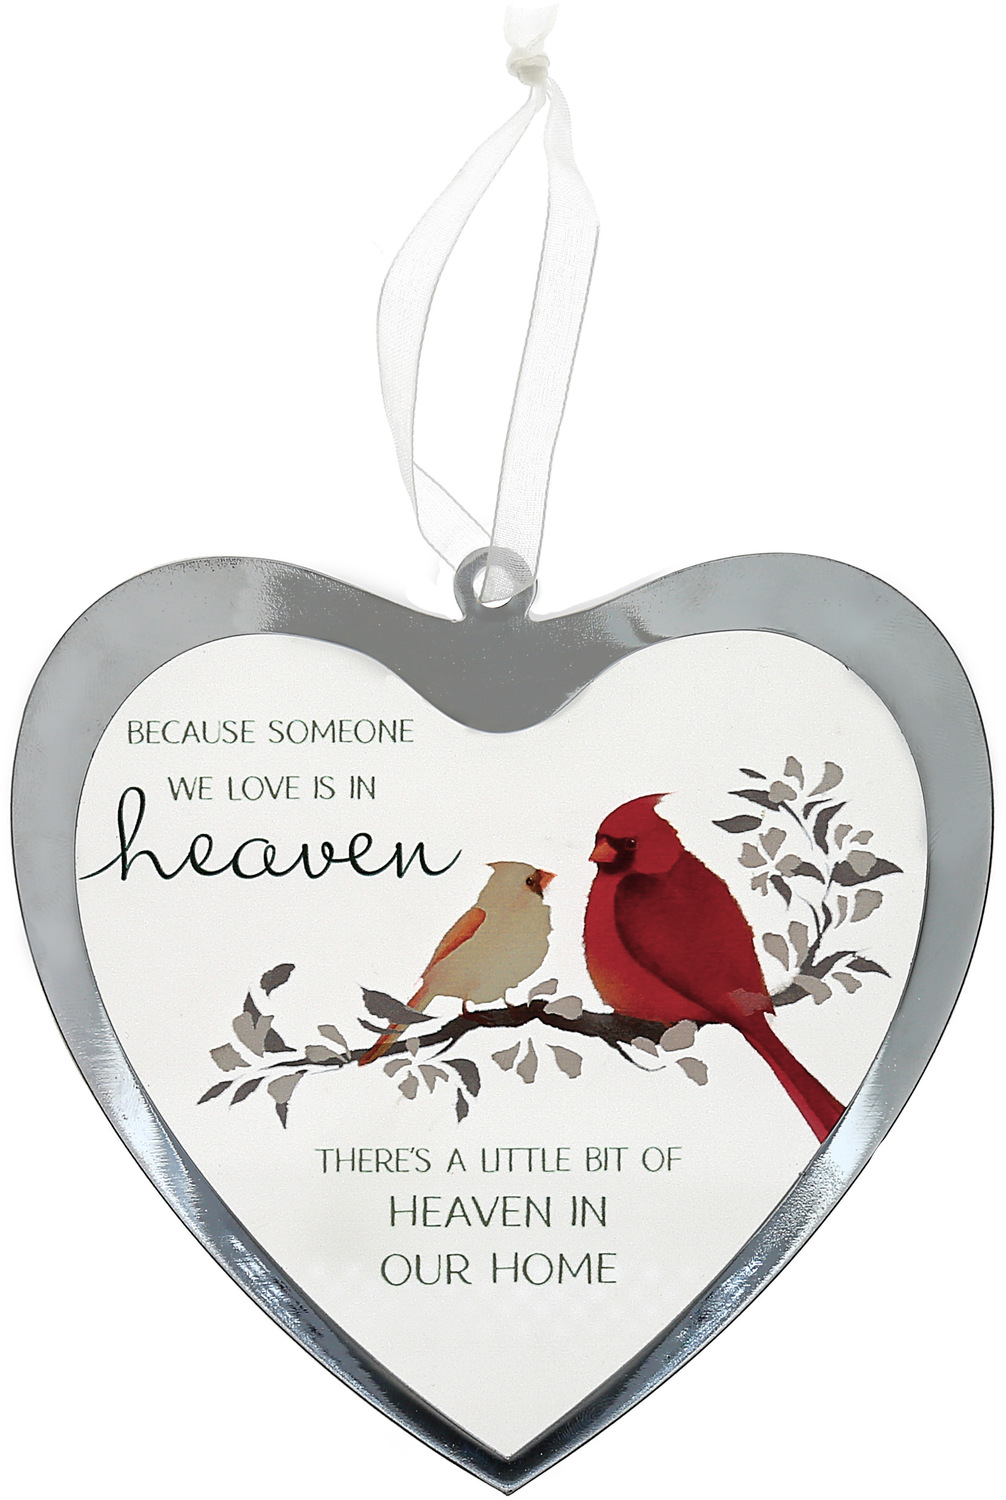 Heaven In Our Home by Always by Your Side - Heaven In Our Home - 4.75" Mirrored Glass Ornament